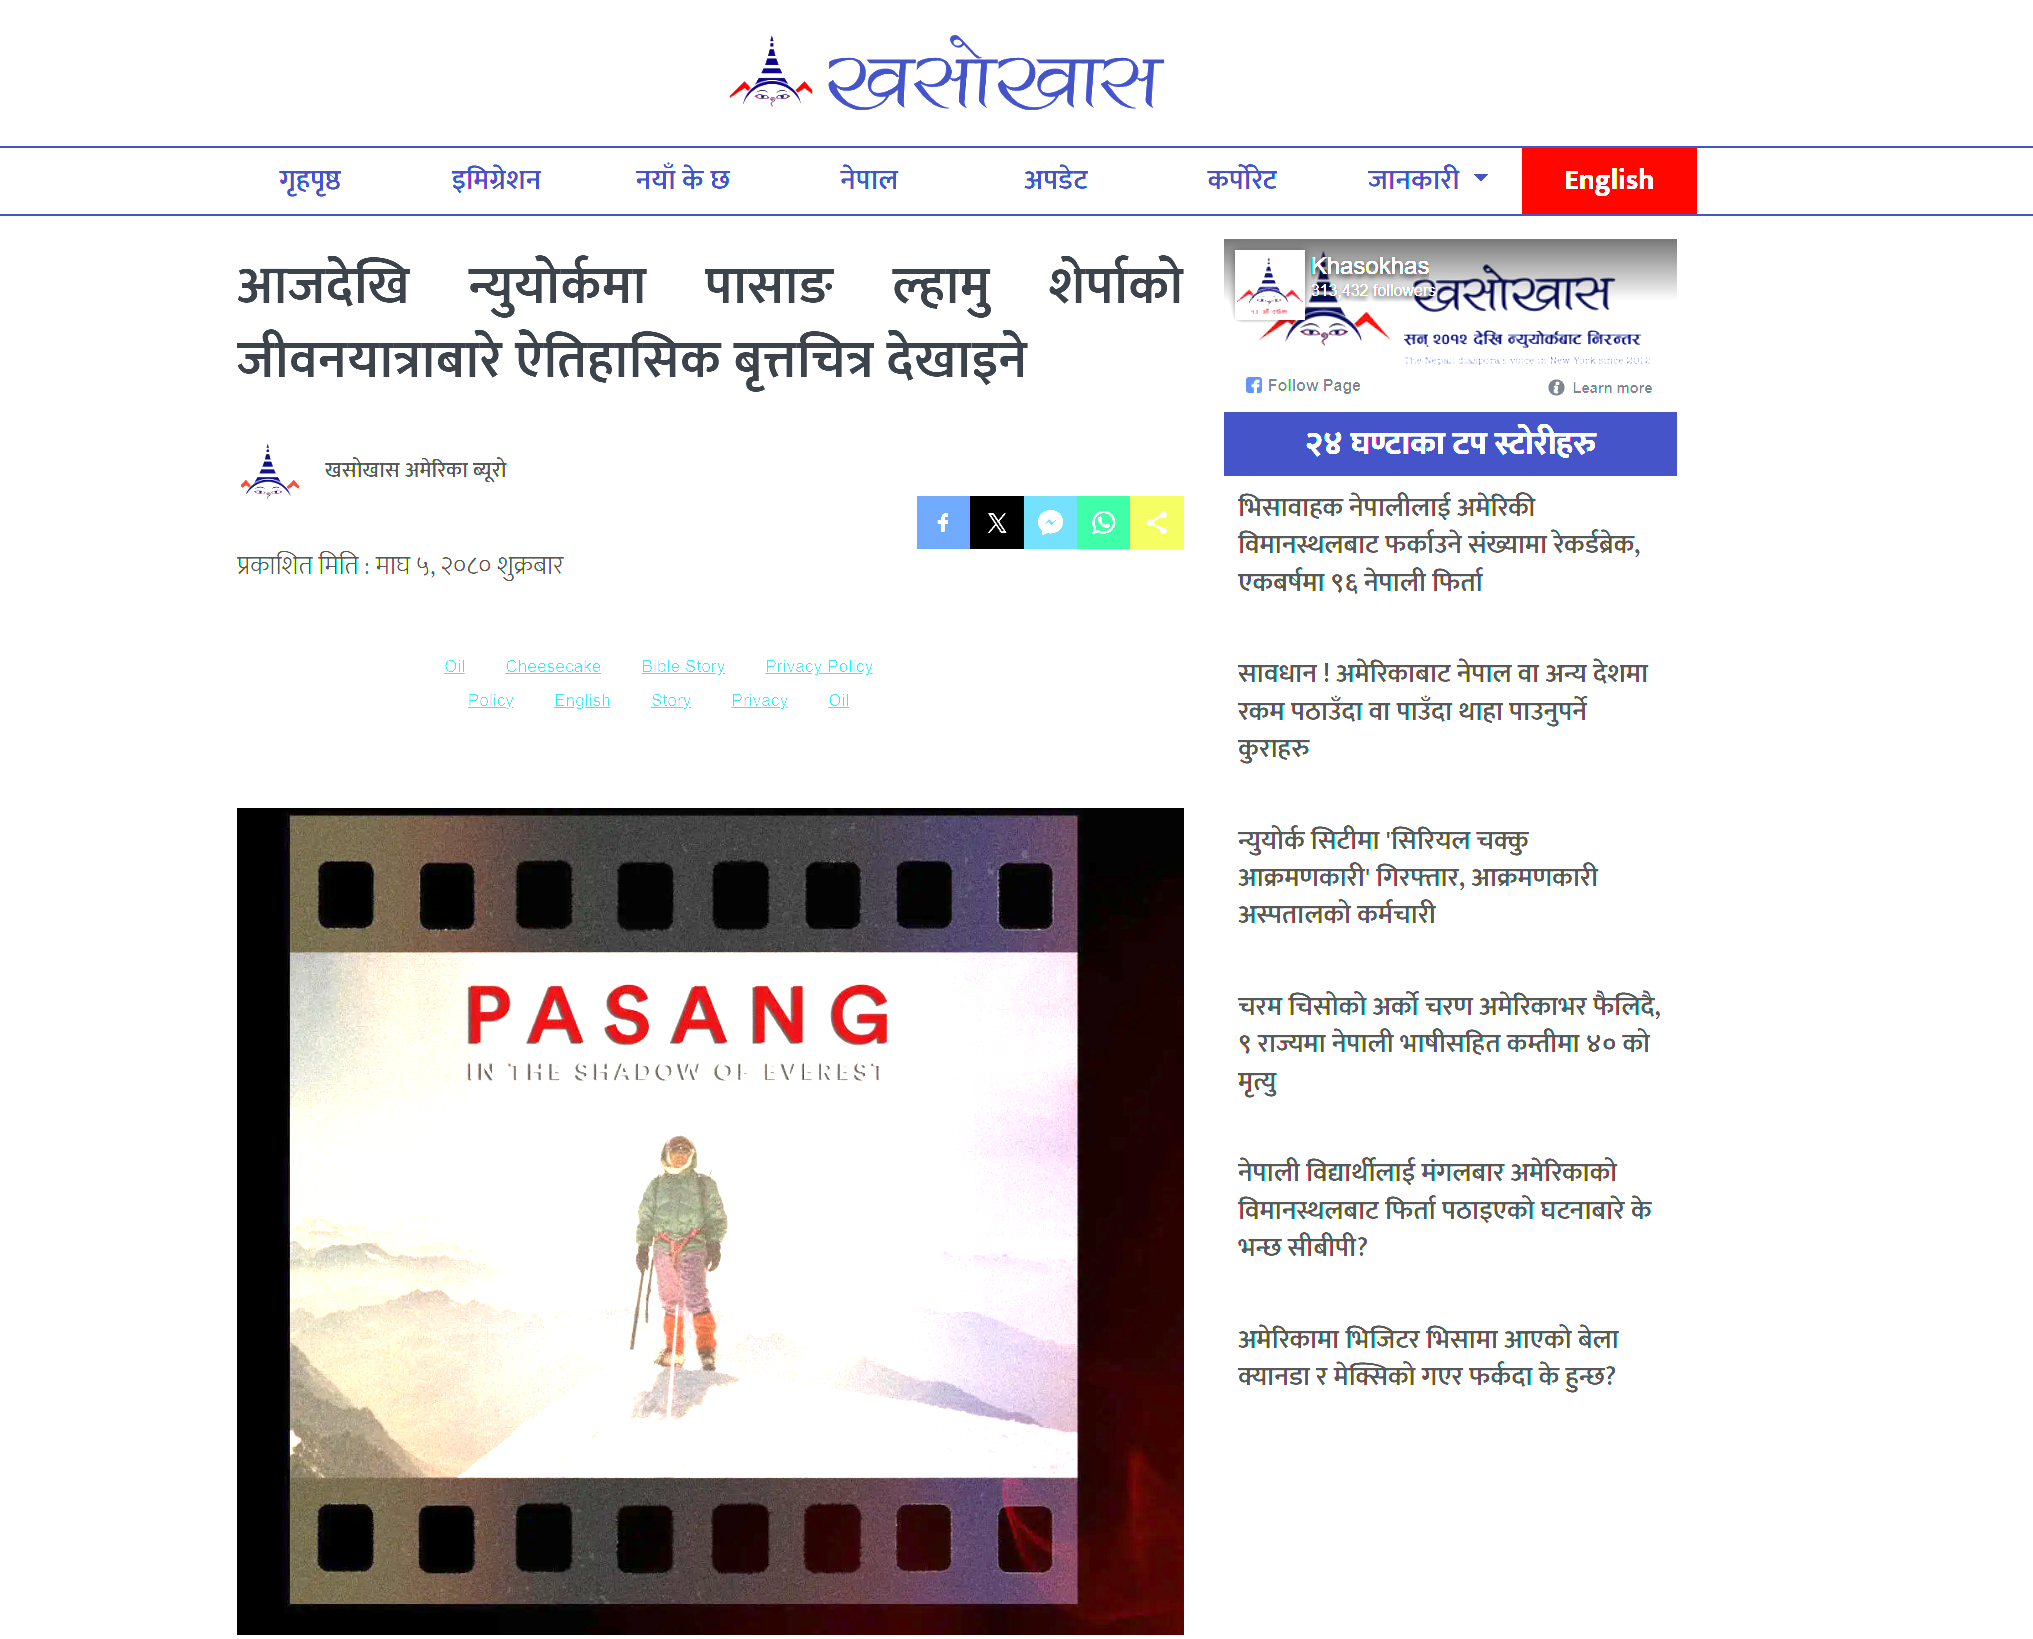 Nepali language news organization Khasokas, published an article about PASANG: In the Shadow of Everest